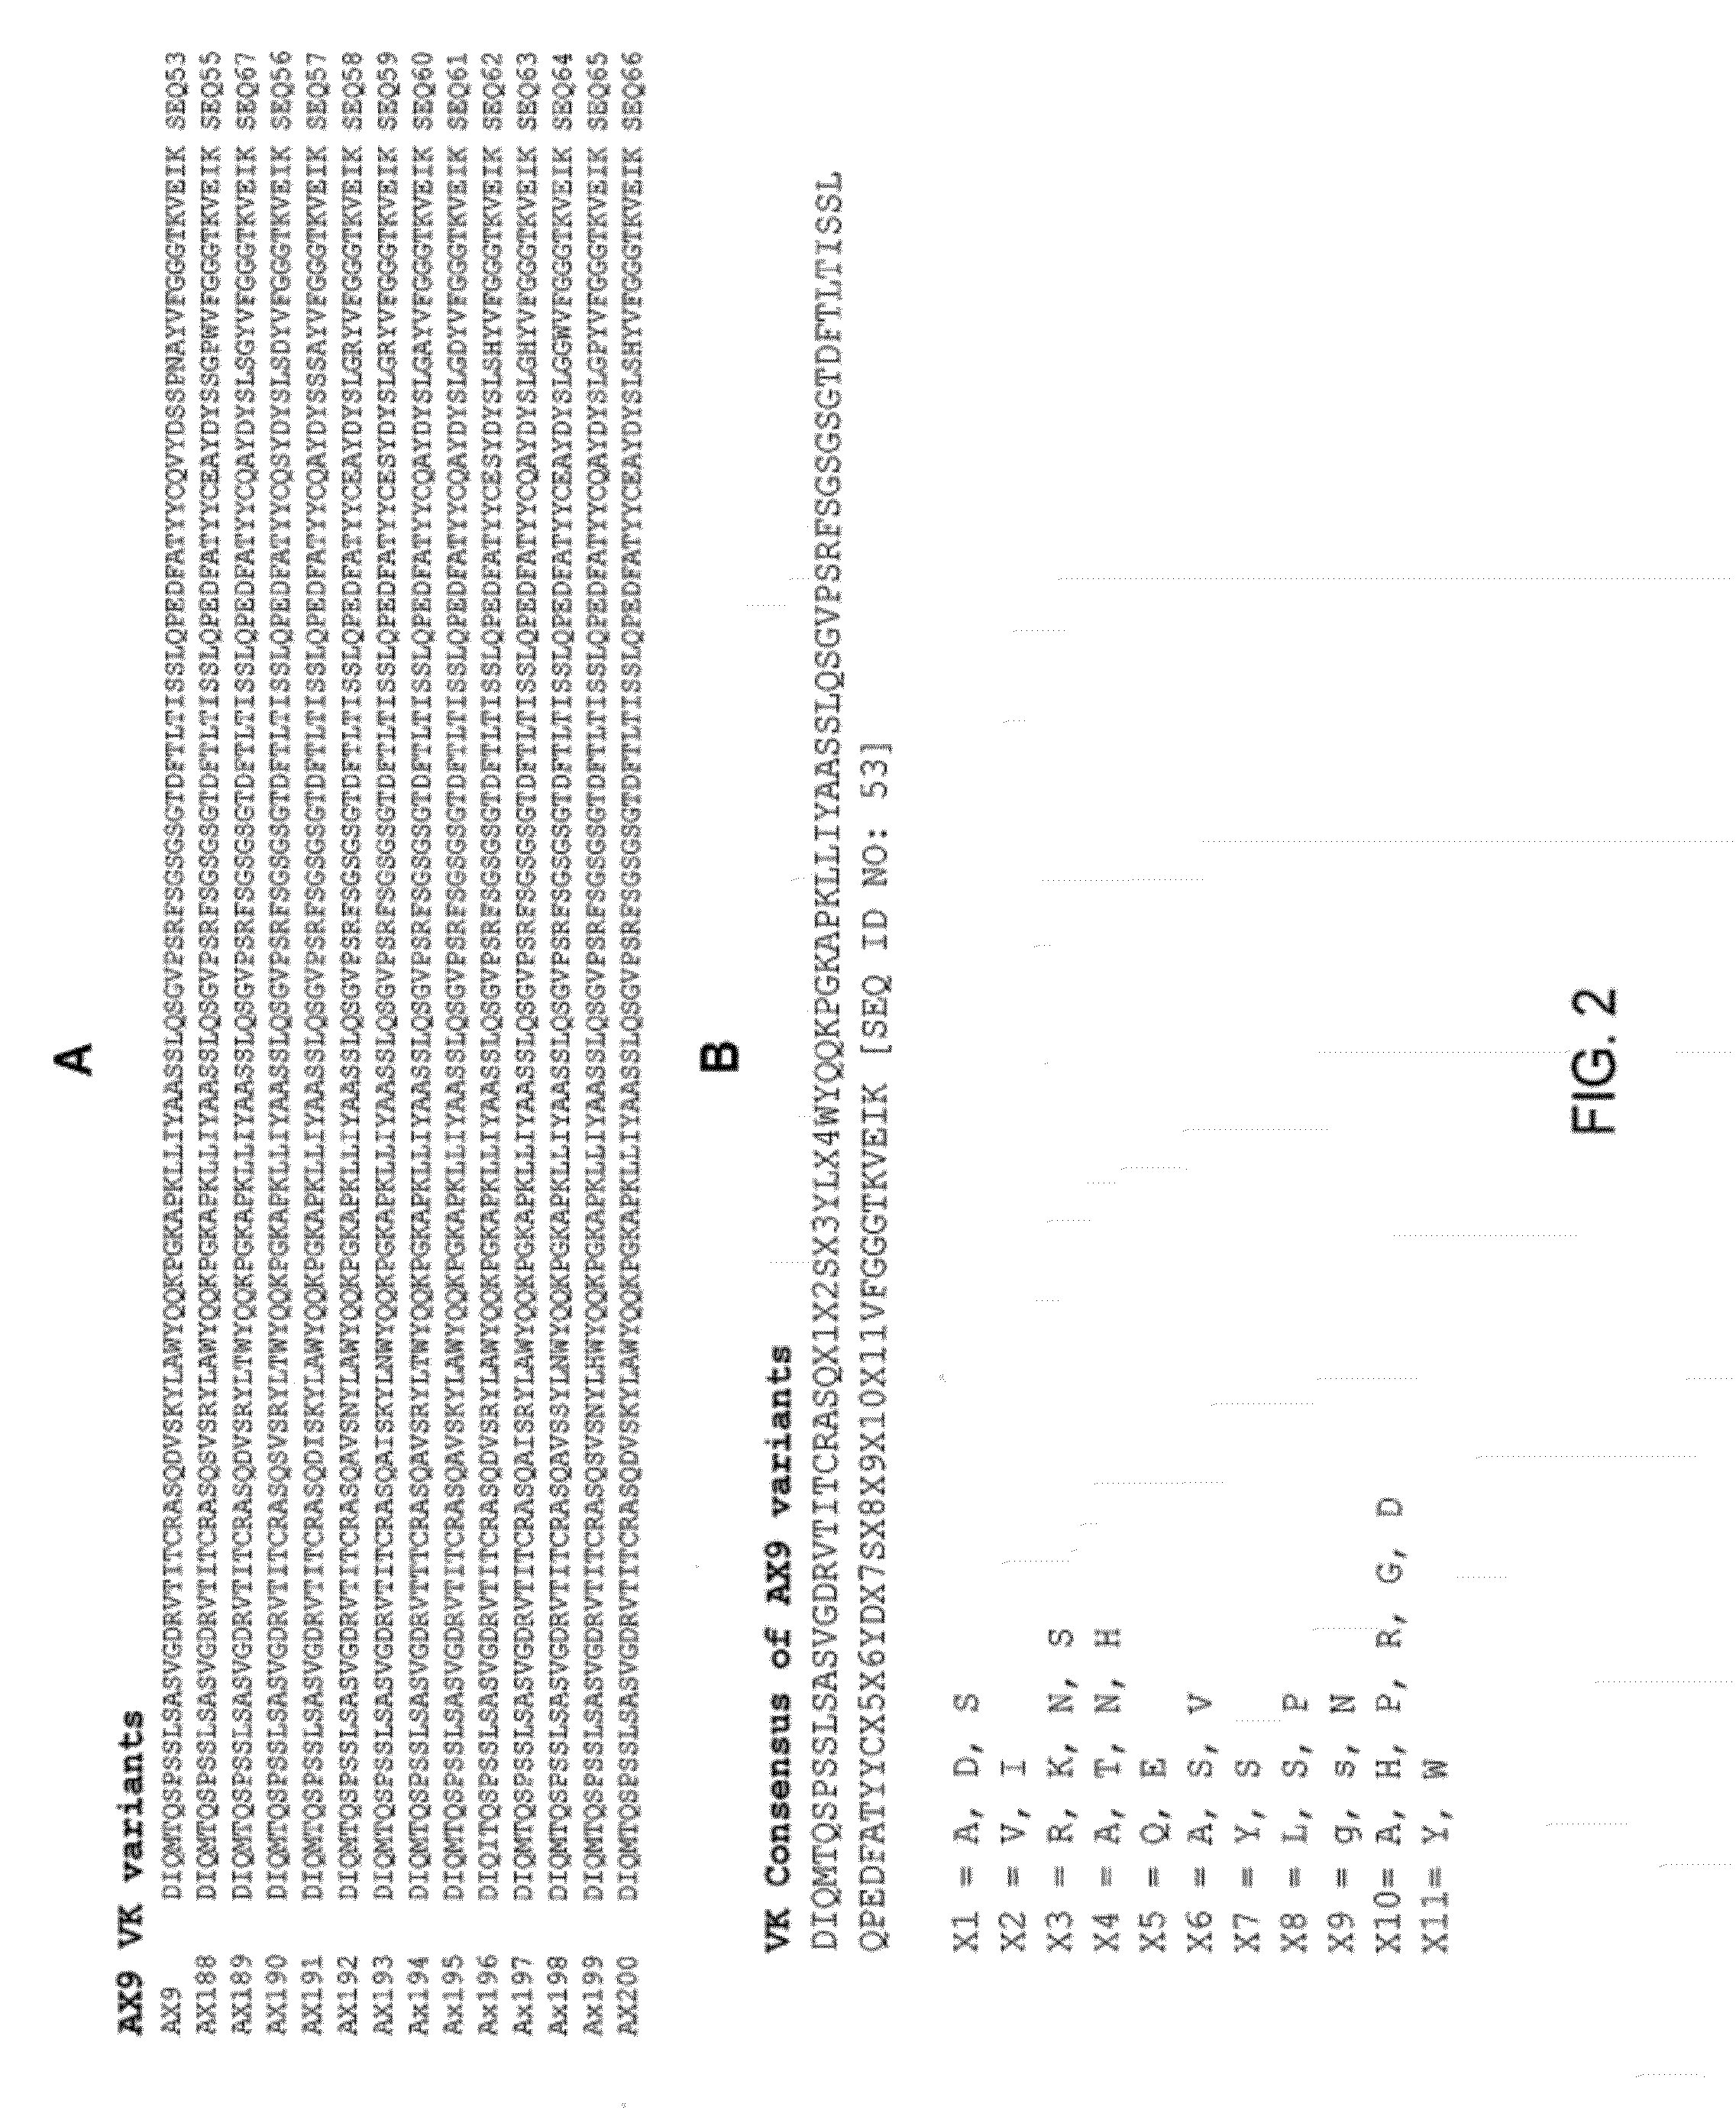 Ax1 and ax189 psck9 antagonists and variants